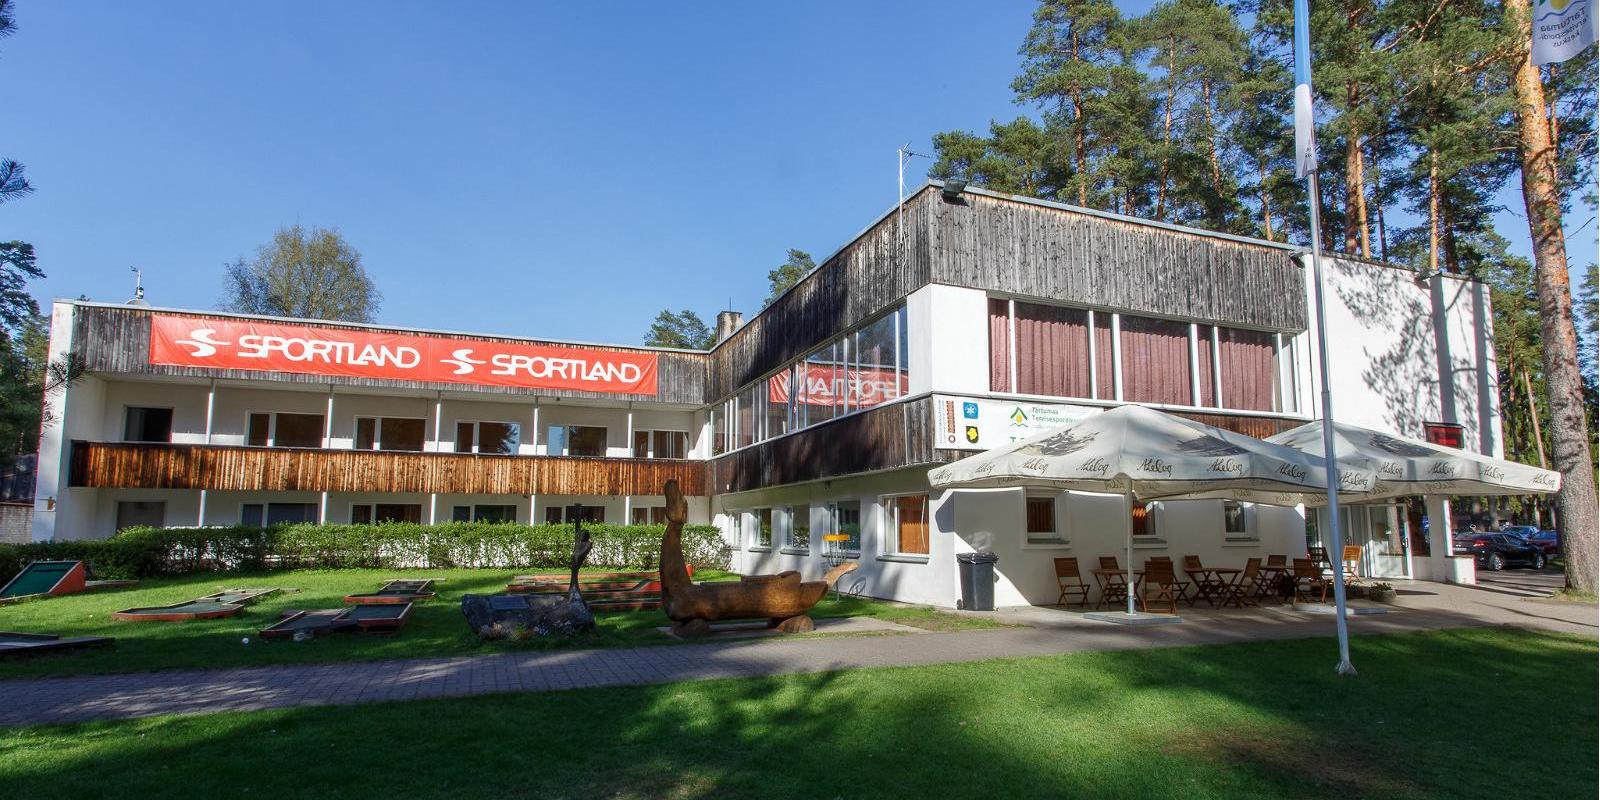 The main building of Tartu County Recreational Sports Centre with a café and rental